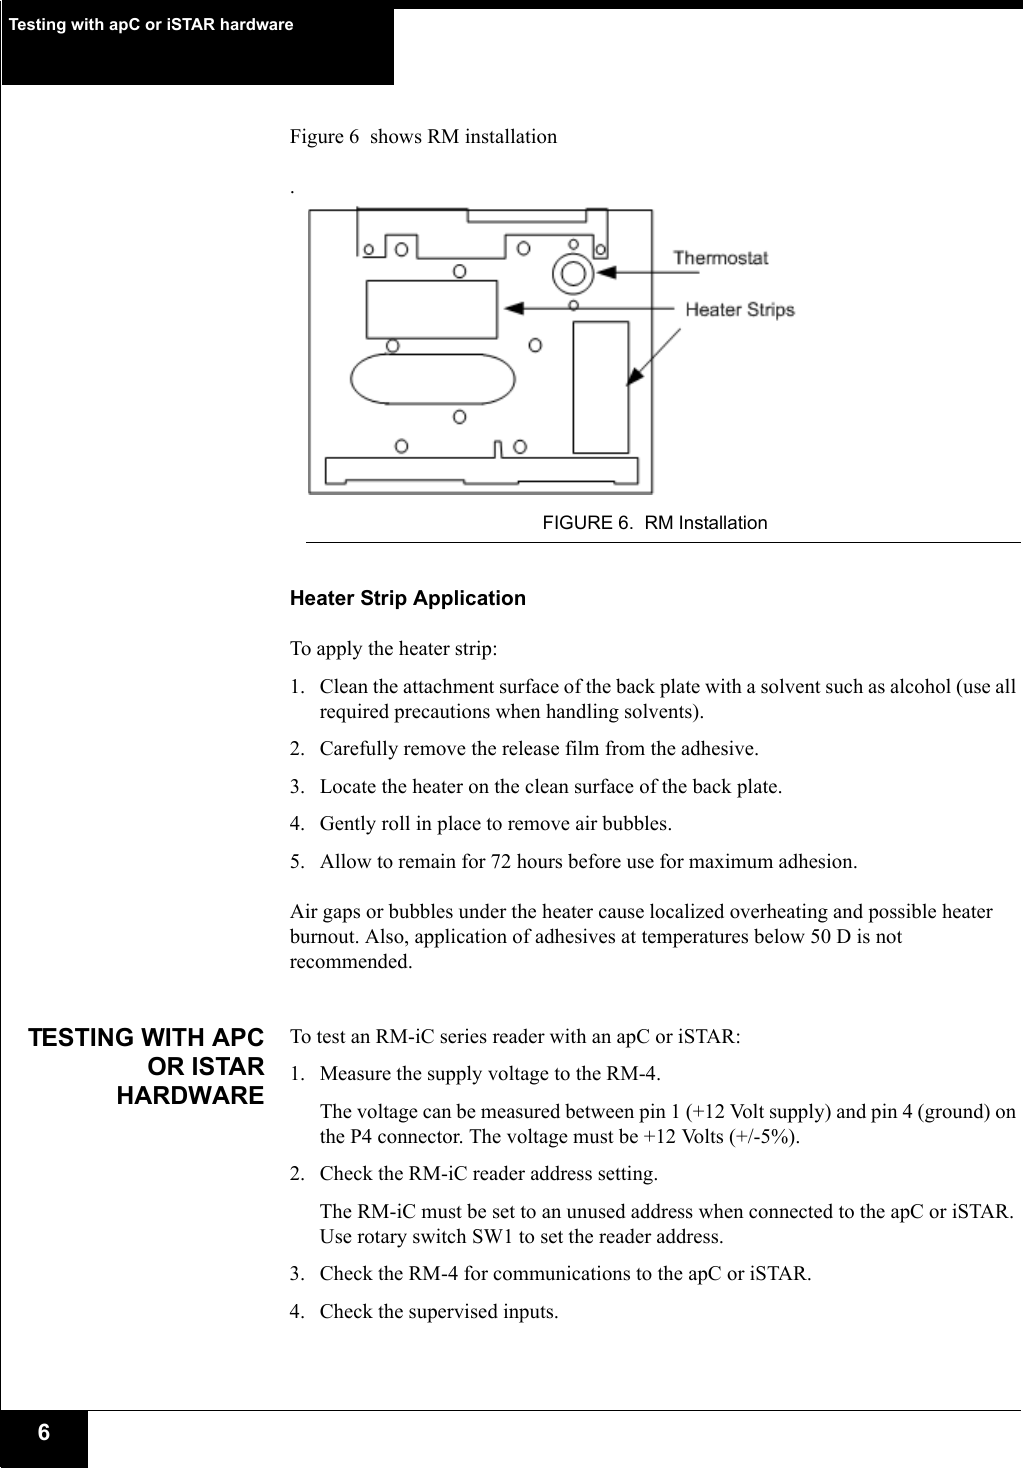 Testing with apC or iSTAR hardware6Figure 6  shows RM installation.FIGURE 6. RM InstallationHeater Strip ApplicationTo apply the heater strip:1. Clean the attachment surface of the back plate with a solvent such as alcohol (use all required precautions when handling solvents).2. Carefully remove the release film from the adhesive.3. Locate the heater on the clean surface of the back plate.4. Gently roll in place to remove air bubbles.5. Allow to remain for 72 hours before use for maximum adhesion. Air gaps or bubbles under the heater cause localized overheating and possible heater burnout. Also, application of adhesives at temperatures below 50 D is not recommended.TESTING WITH APCOR ISTARHARDWARETo test an RM-iC series reader with an apC or iSTAR:1. Measure the supply voltage to the RM-4. The voltage can be measured between pin 1 (+12 Volt supply) and pin 4 (ground) on the P4 connector. The voltage must be +12 Volts (+/-5%).2. Check the RM-iC reader address setting. The RM-iC must be set to an unused address when connected to the apC or iSTAR. Use rotary switch SW1 to set the reader address.3. Check the RM-4 for communications to the apC or iSTAR. 4. Check the supervised inputs. 